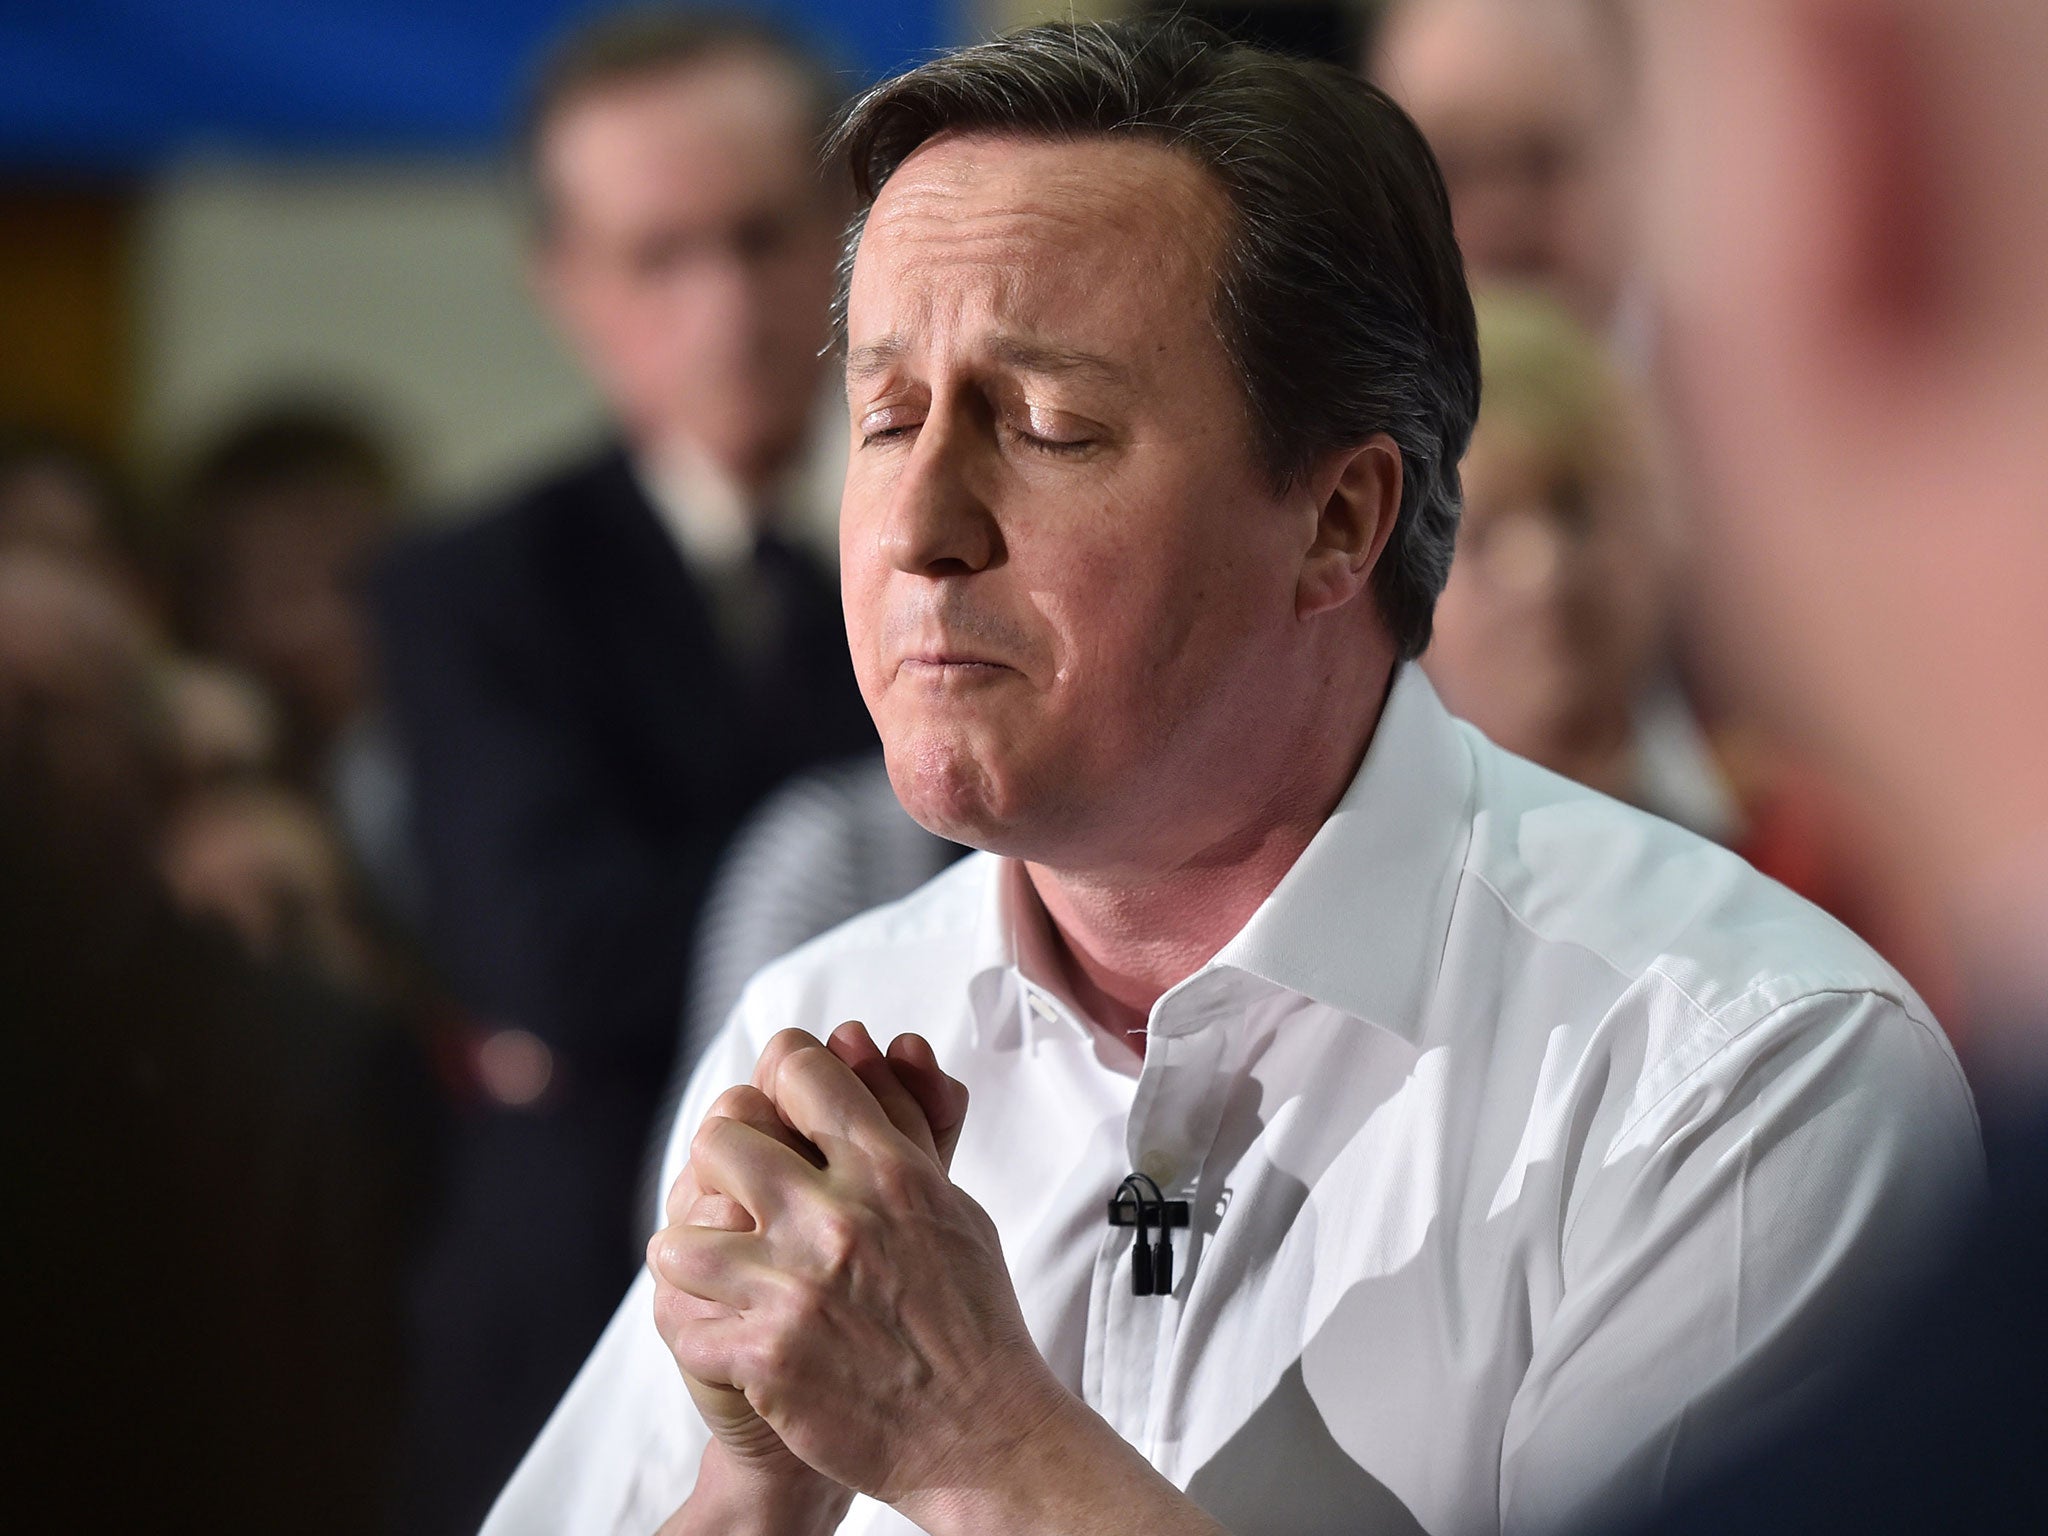 David Cameron gives a speech at a General Election Rally at The Corsham School in Chippenham, south west England